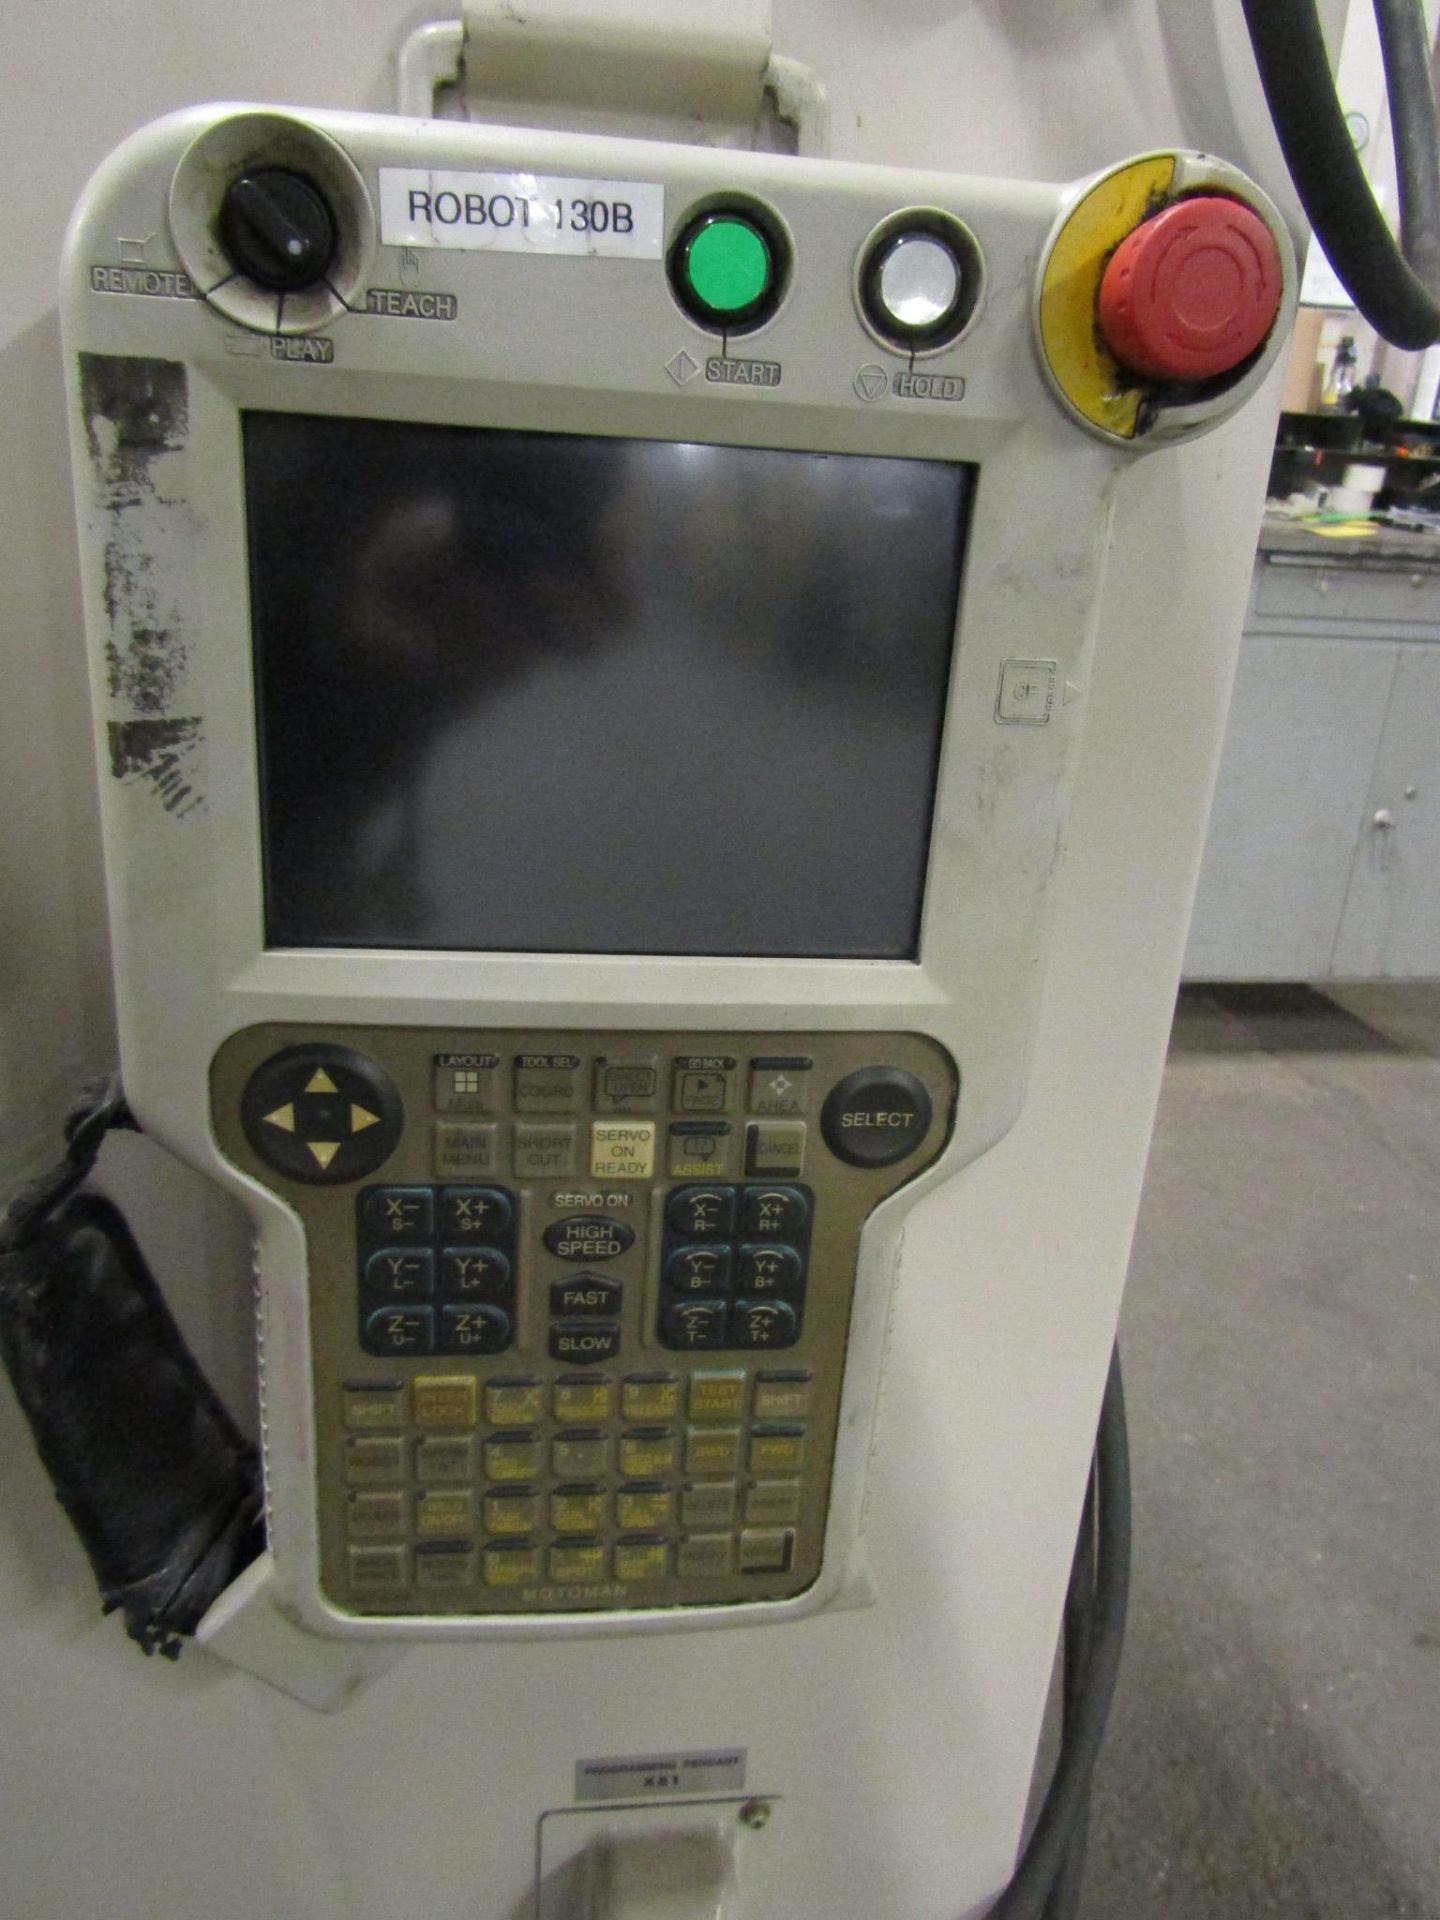 2008 Motoman ES200N Robot 200kg Capacity with Controller COMPLETE with Teach Pendant, Cables, LOW - Image 2 of 2